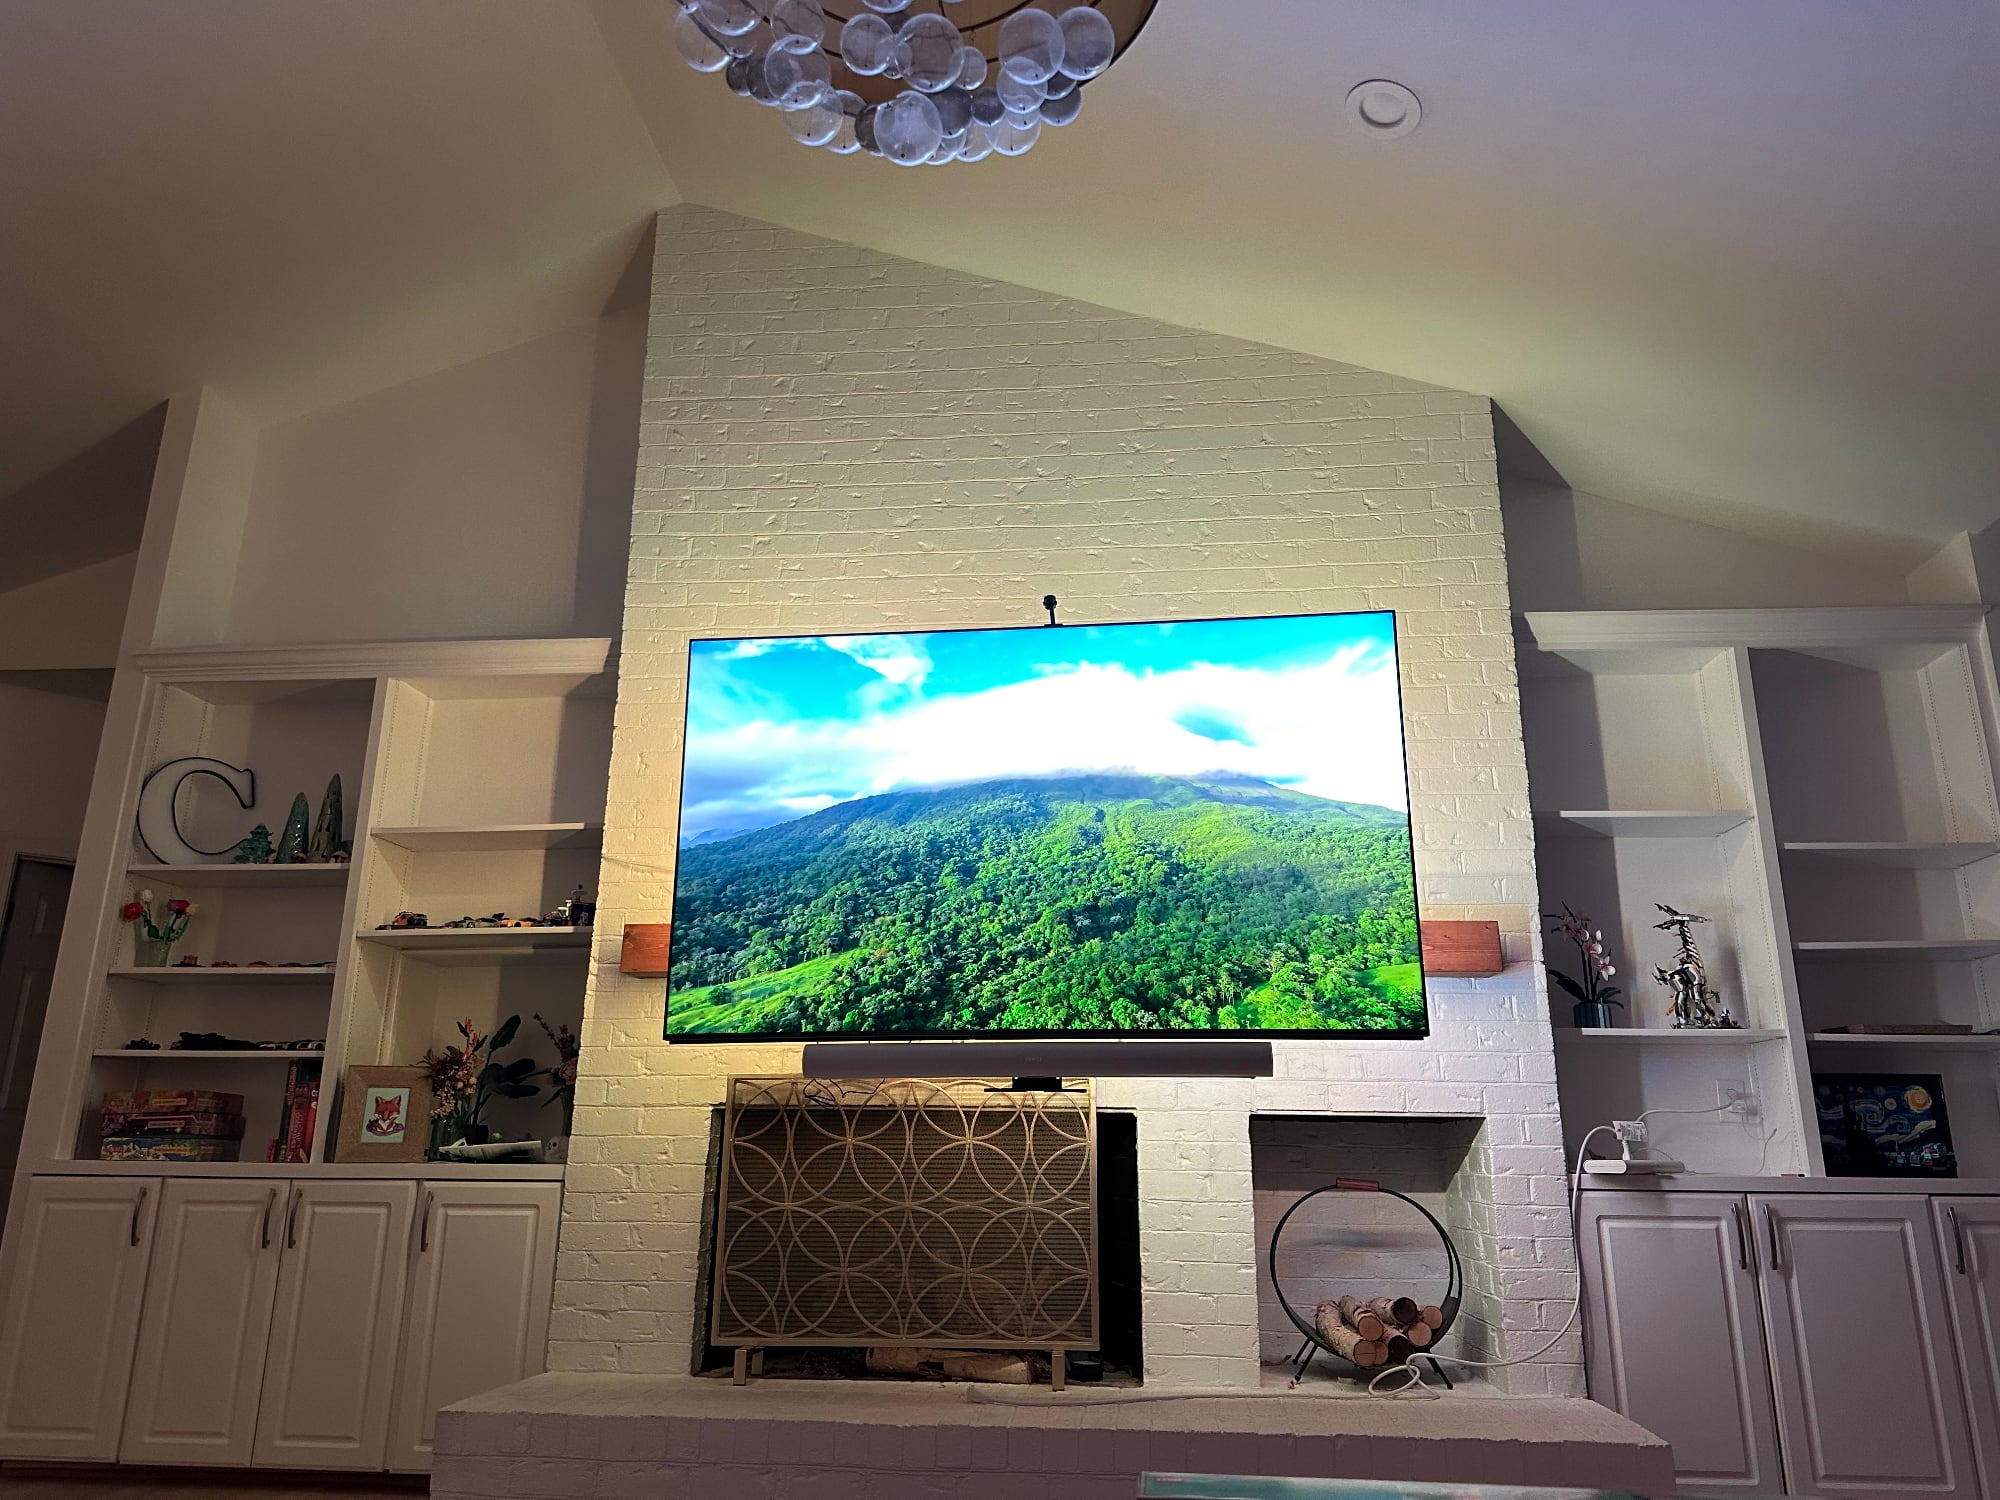 Nanoleaf 4D gives your TV an Ambilight-style upgrade, but there's a catch